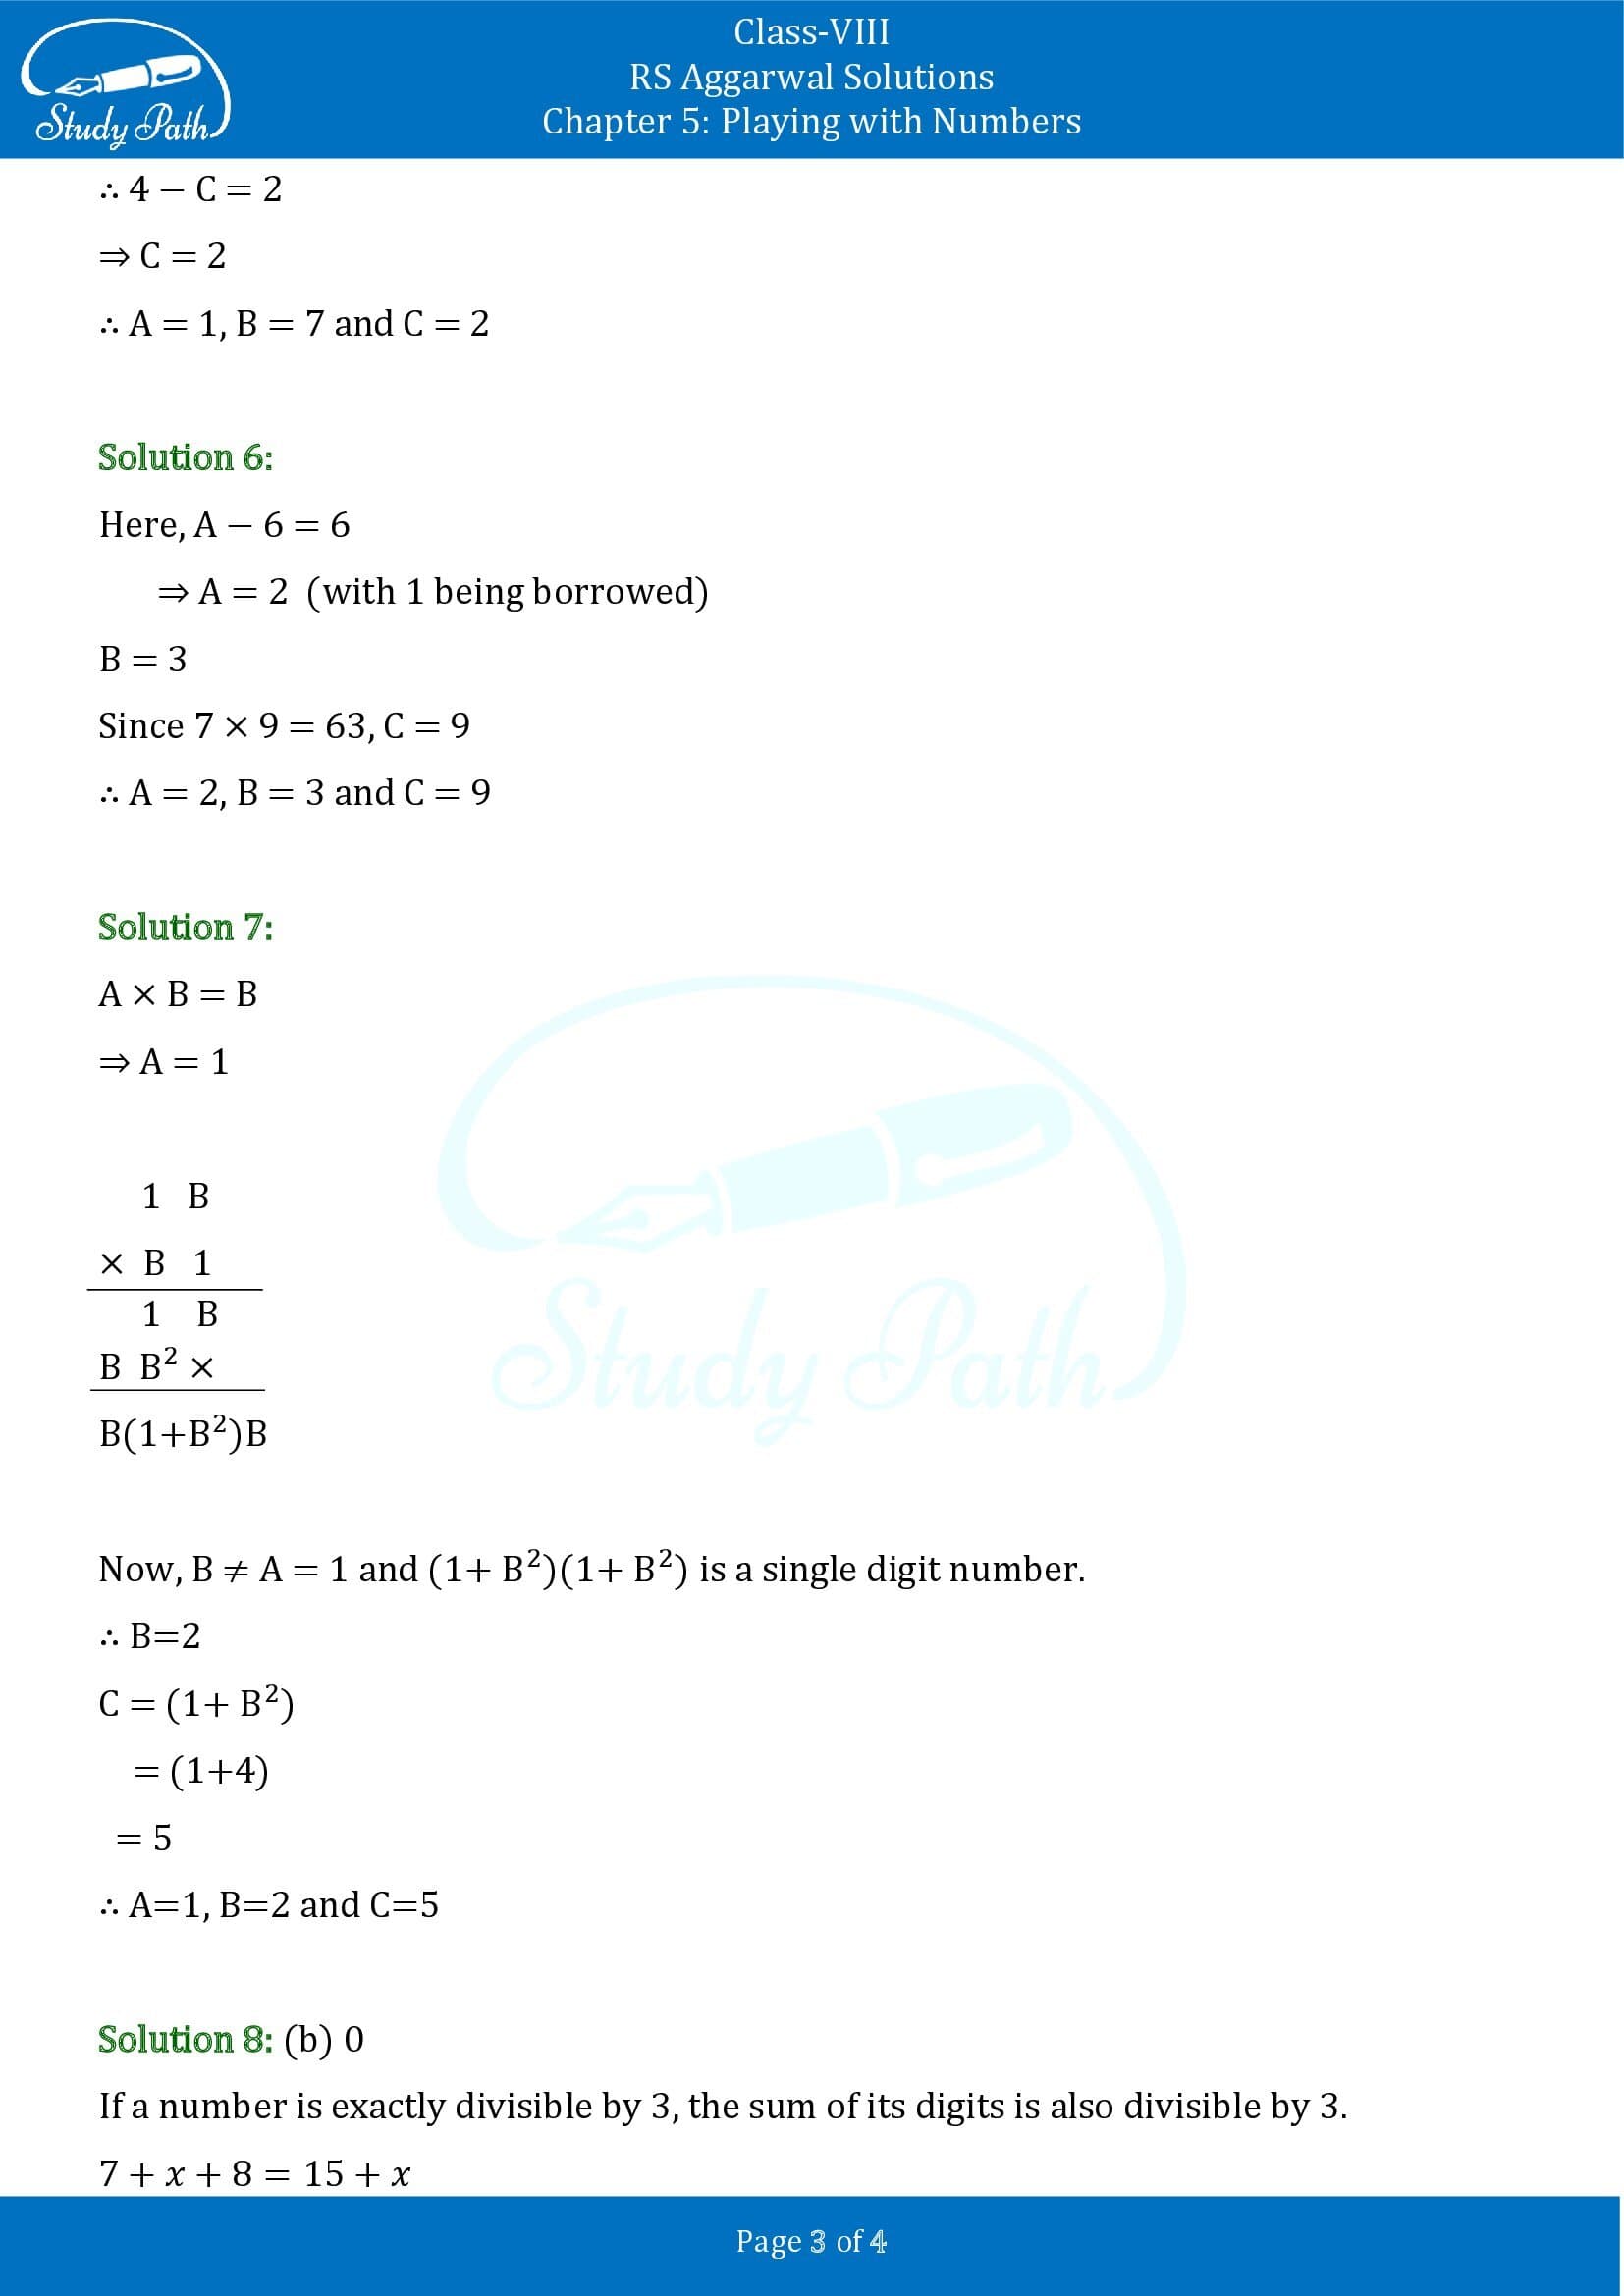 RS Aggarwal Solutions Class 8 Chapter 5 Playing with Numbers Test Paper 00003